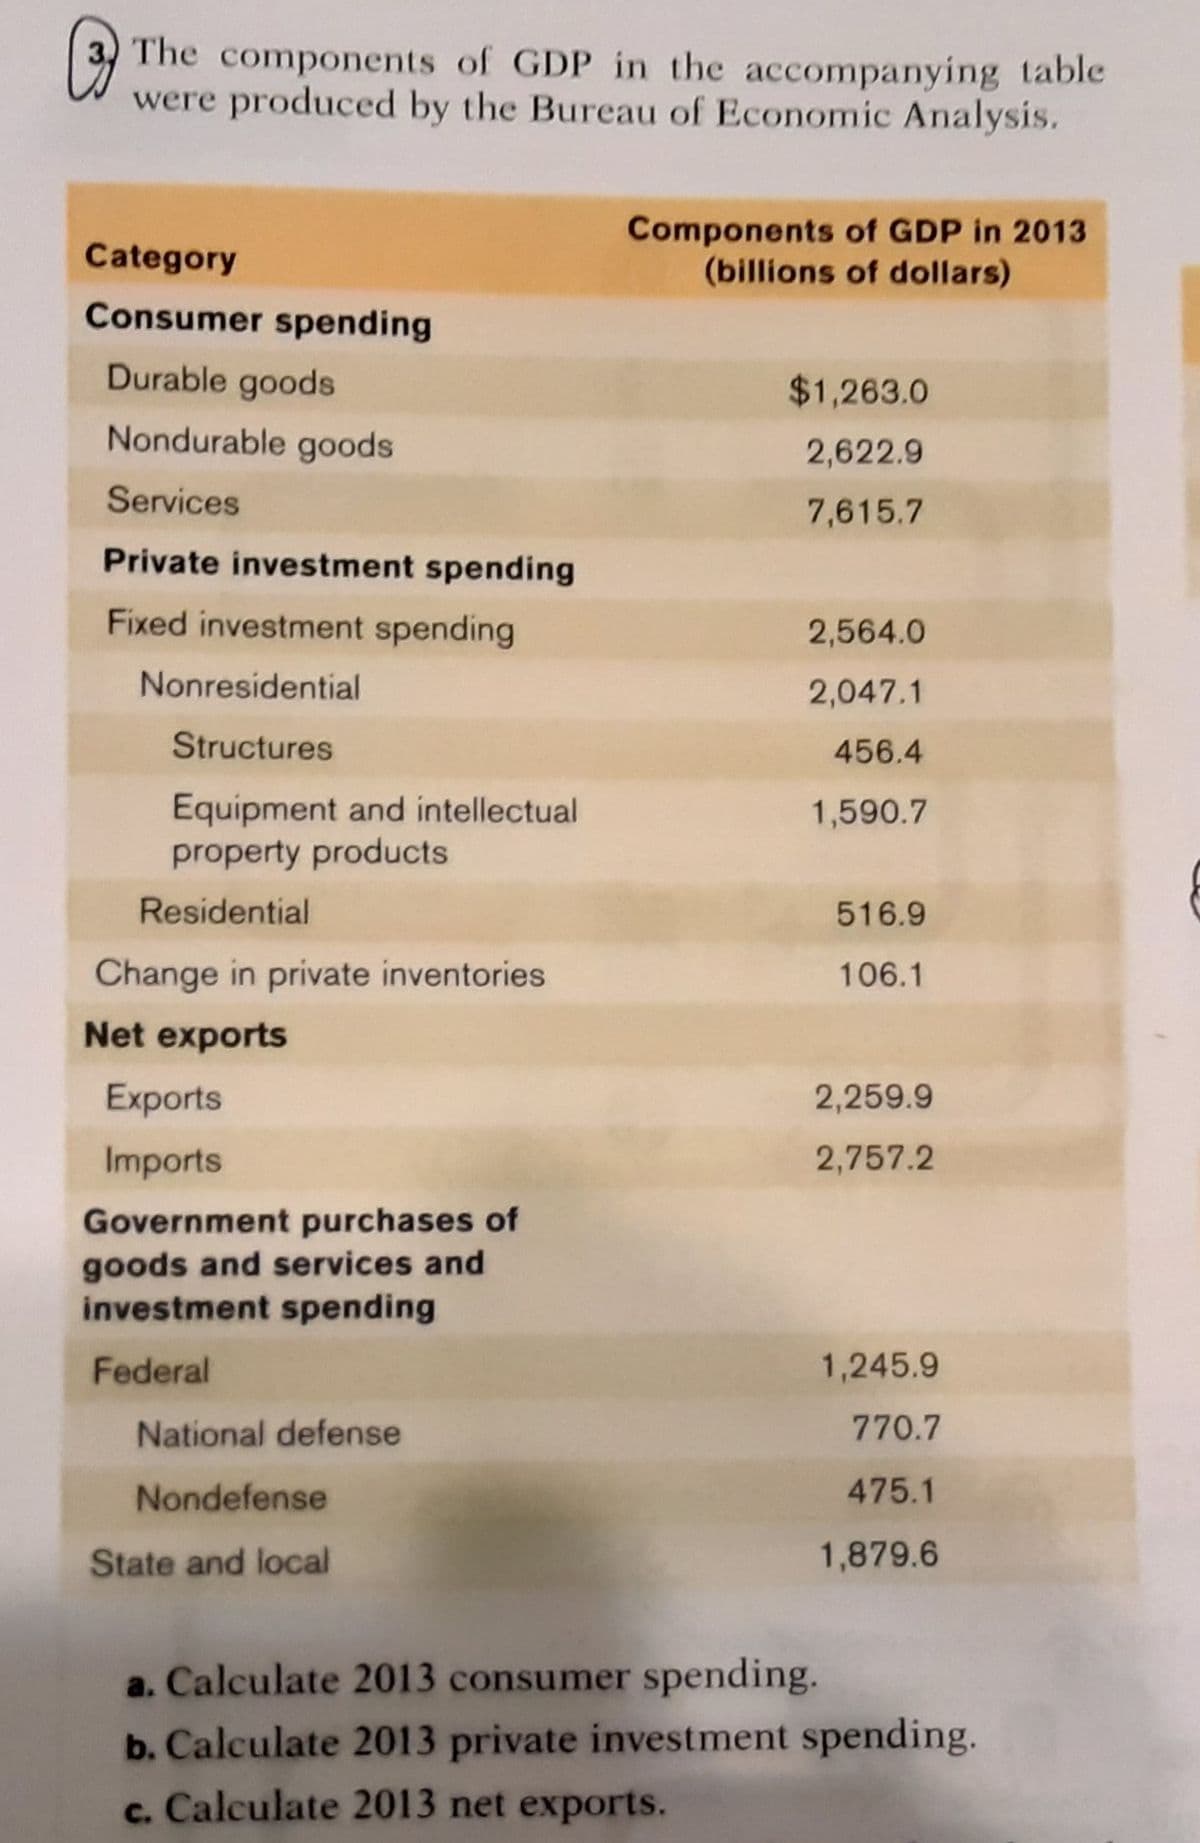 The components of GDP in the accompanying table
were produced by the Bureau of Economic Analysis.
Components of GDP in 2013
(billions of dollars)
Category
Consumer spending
Durable goods
$1,263.0
Nondurable goods
2,622.9
Services
7,615.7
Private investment spending
Fixed investment spending
2,564.0
Nonresidential
2,047.1
Structures
456.4
Equipment and intellectual
property products
1,590.7
Residential
516.9
Change in private inventories
106.1
Net exports
Exports
2,259.9
Imports
2,757.2
Government purchases of
goods and services and
investment spending
Federal
1,245.9
National defense
770.7
Nondefense
475.1
State and local
1,879.6
a. Calculate 2013 consumer spending.
b. Calculate 2013 private investment spending.
c. Calculate 2013 net exports.
